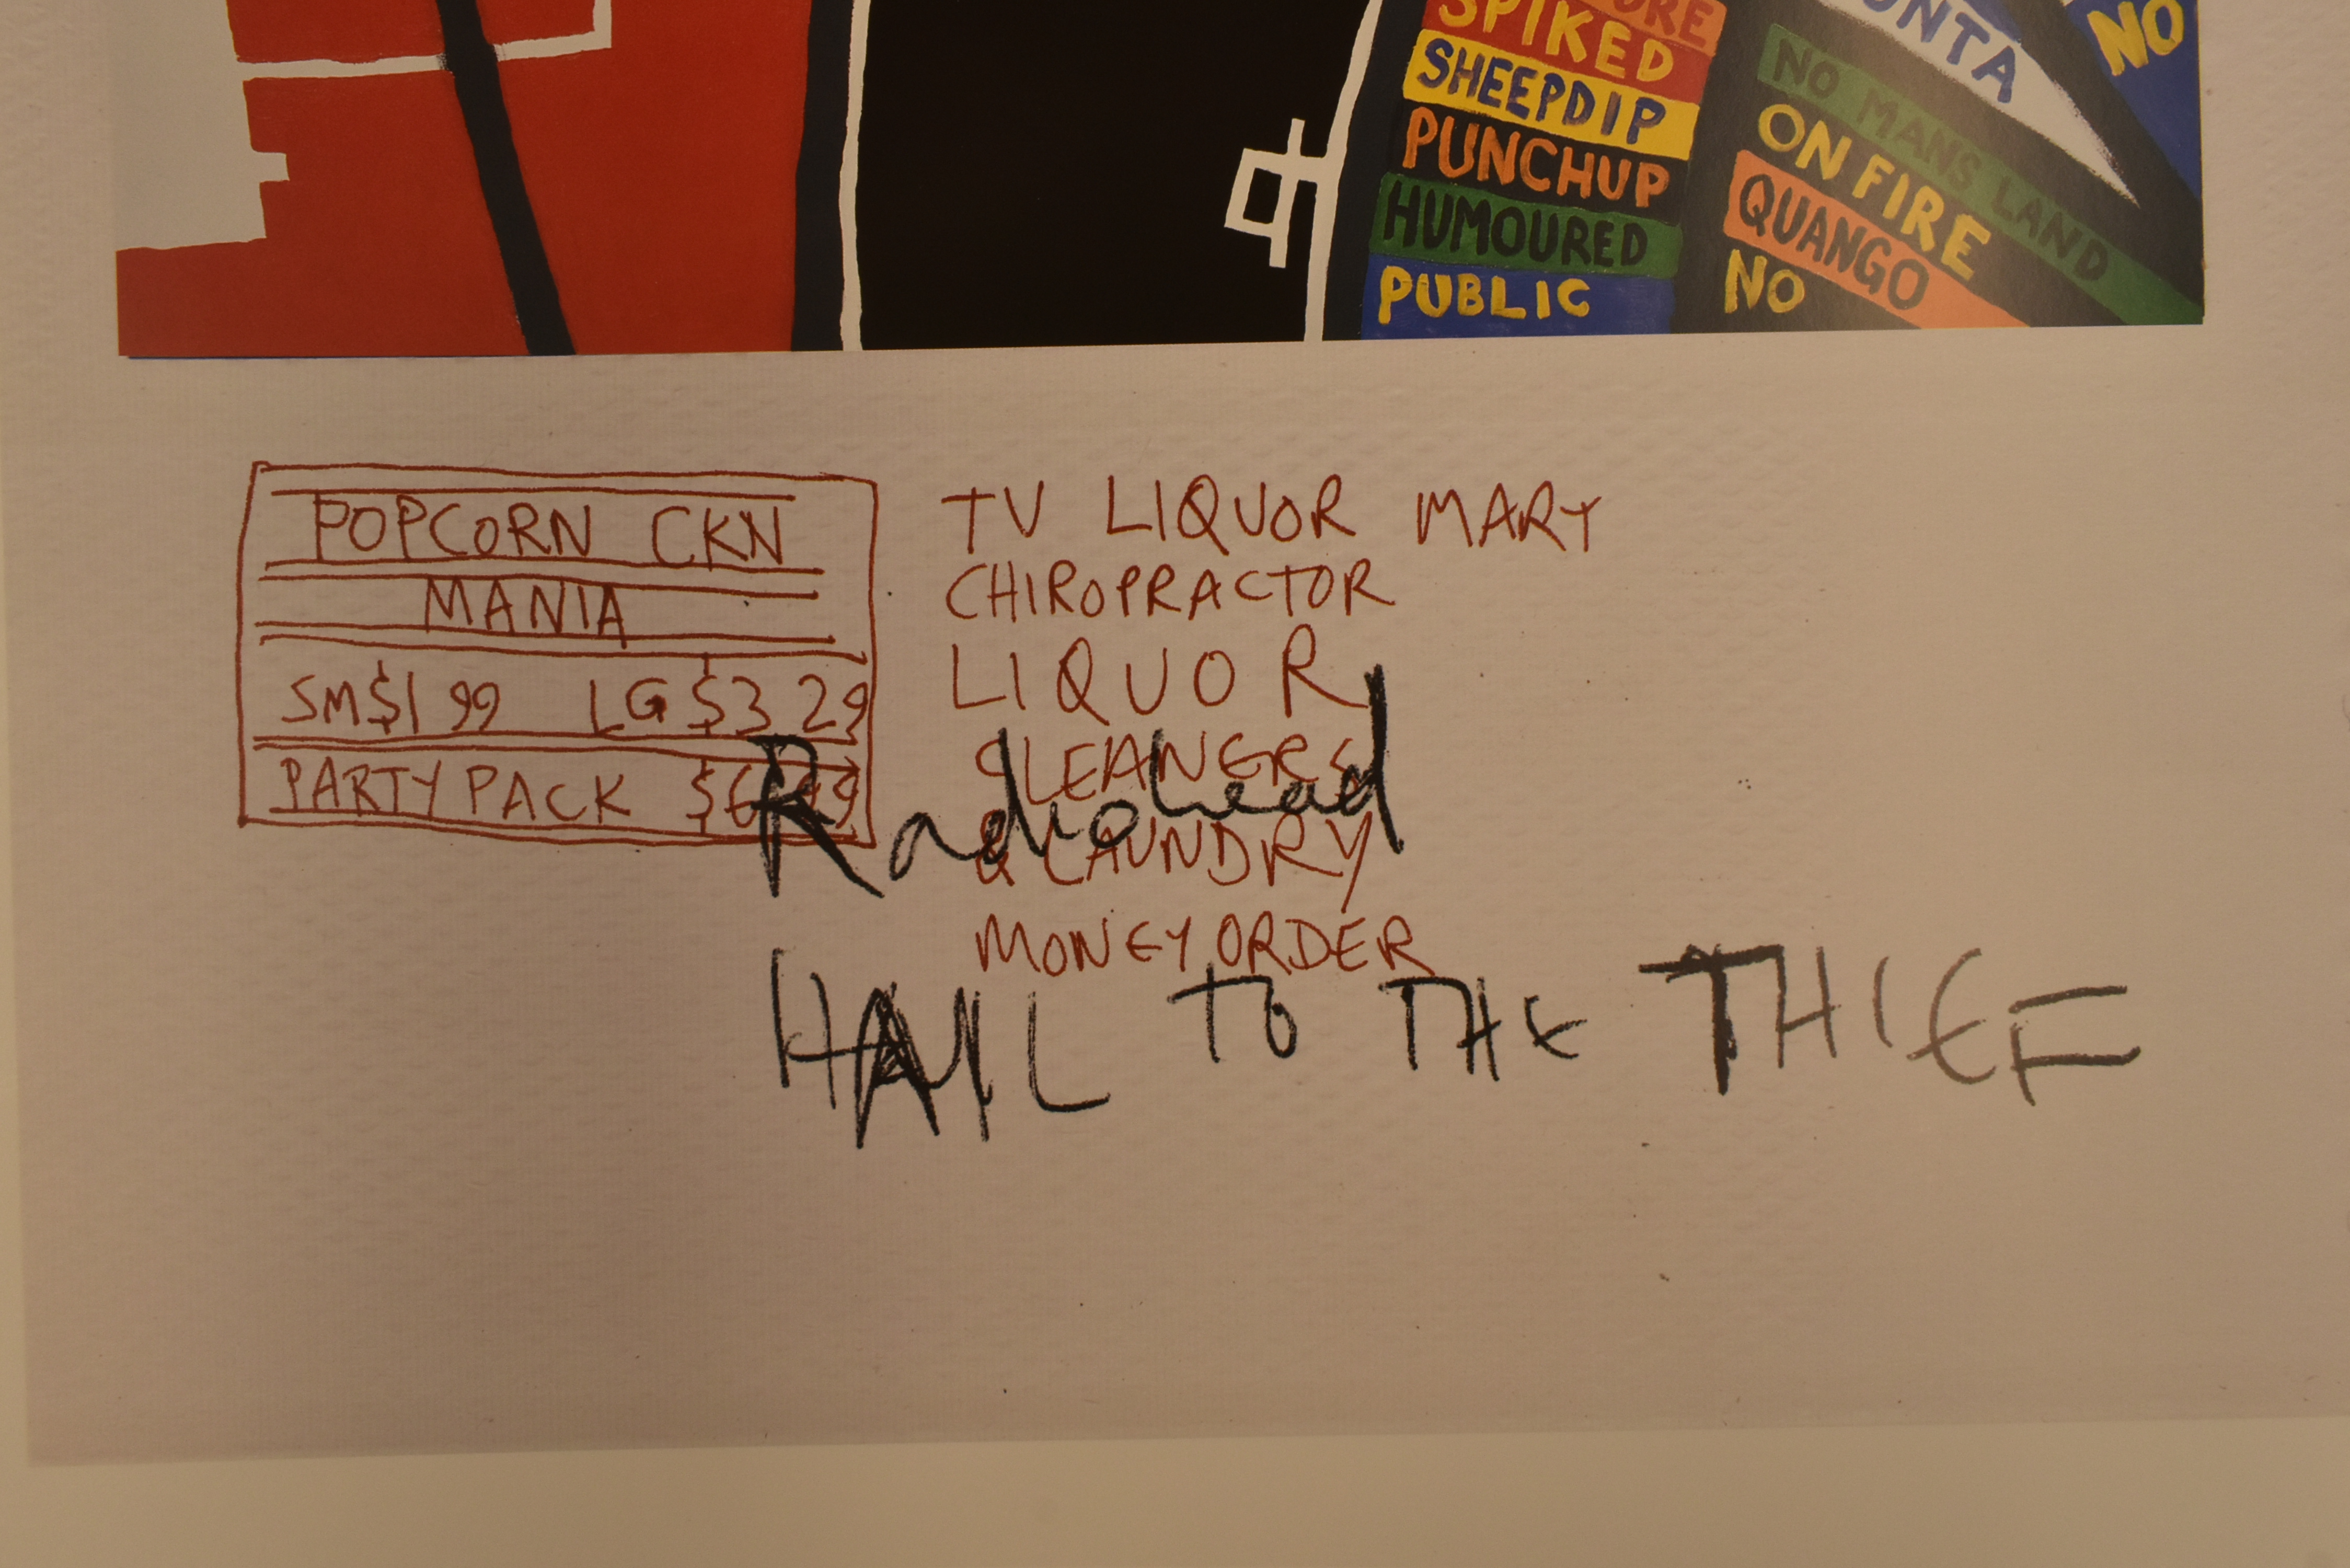 STANLEY DONWOOD - RADIOHEAD - HAIL TO THE THIEF 2003 - Image 7 of 10